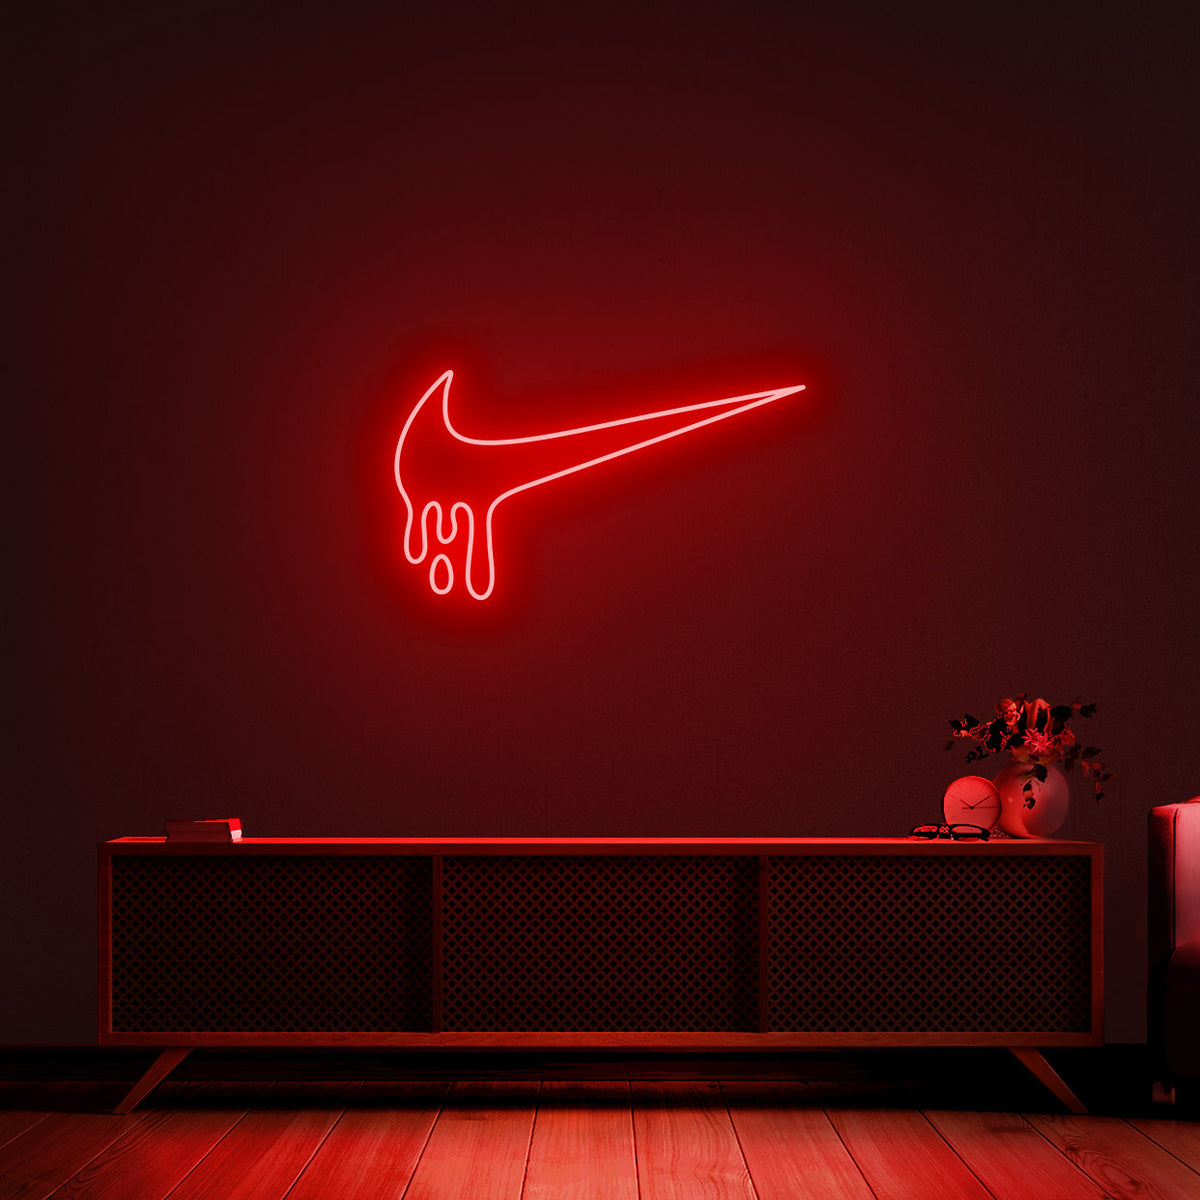 Él mismo canal pobre 44790297**** - Dripping nike tick – @NEONs.co.uk